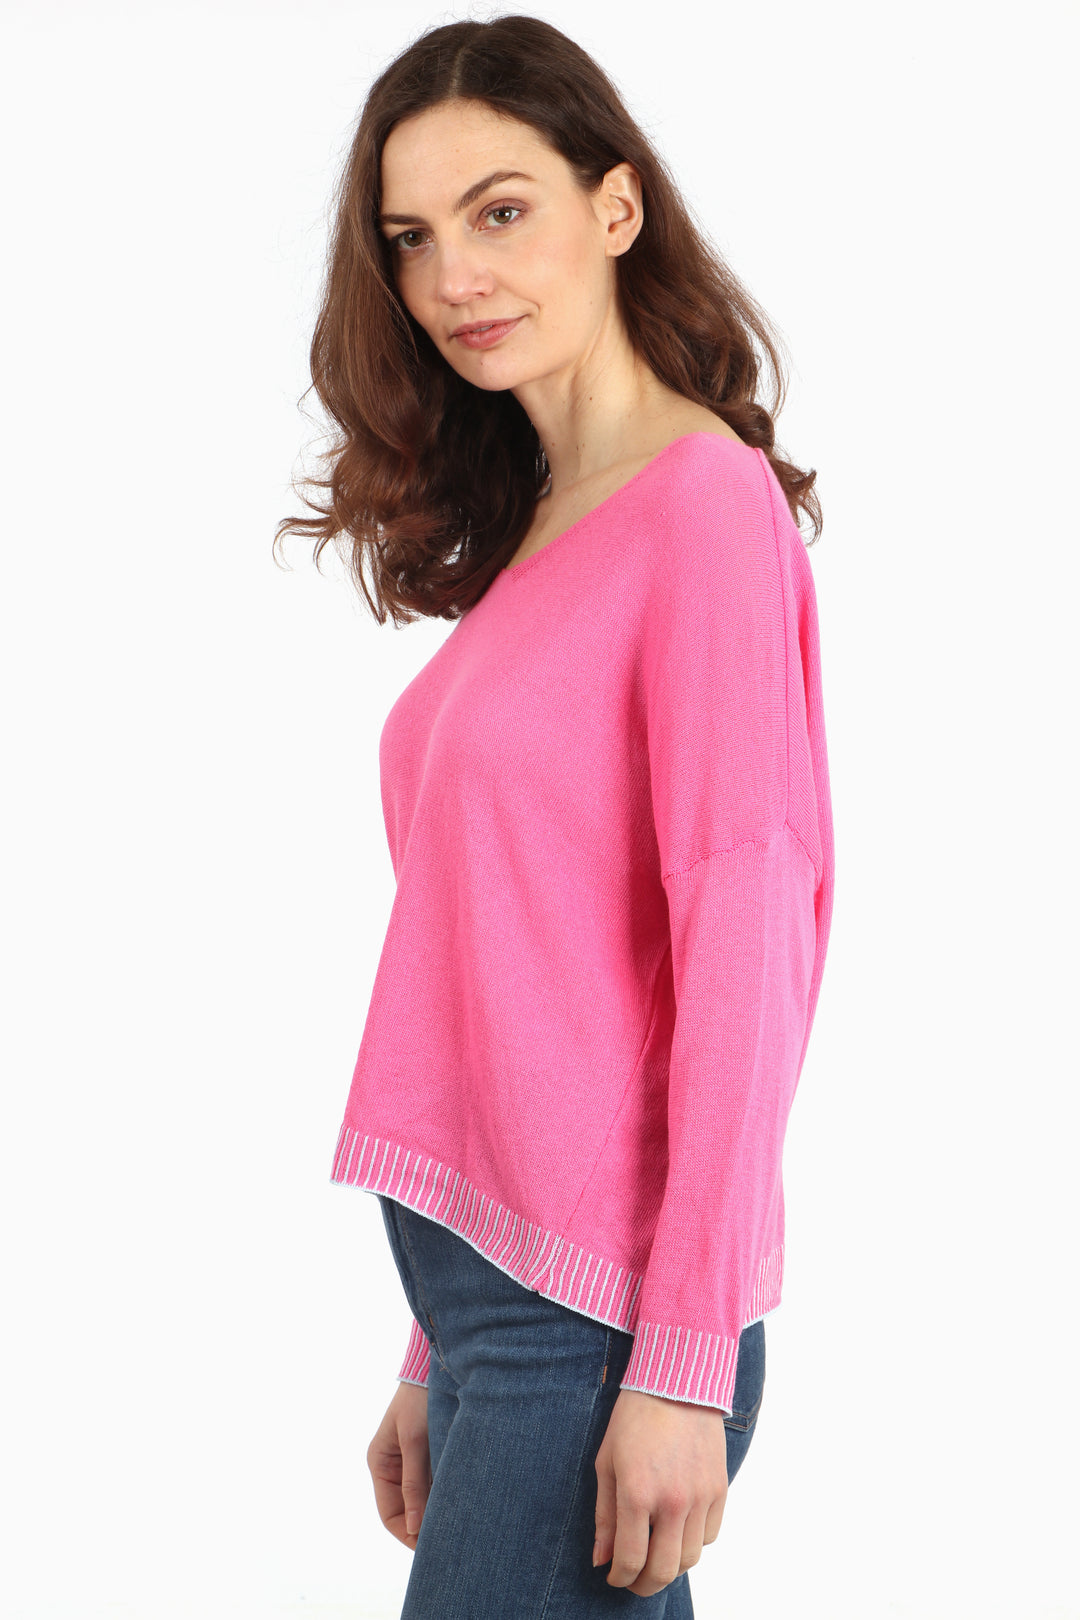 model showing a side view of the pink cotton jumper, showing the light blue stitching on the cuffs and edge